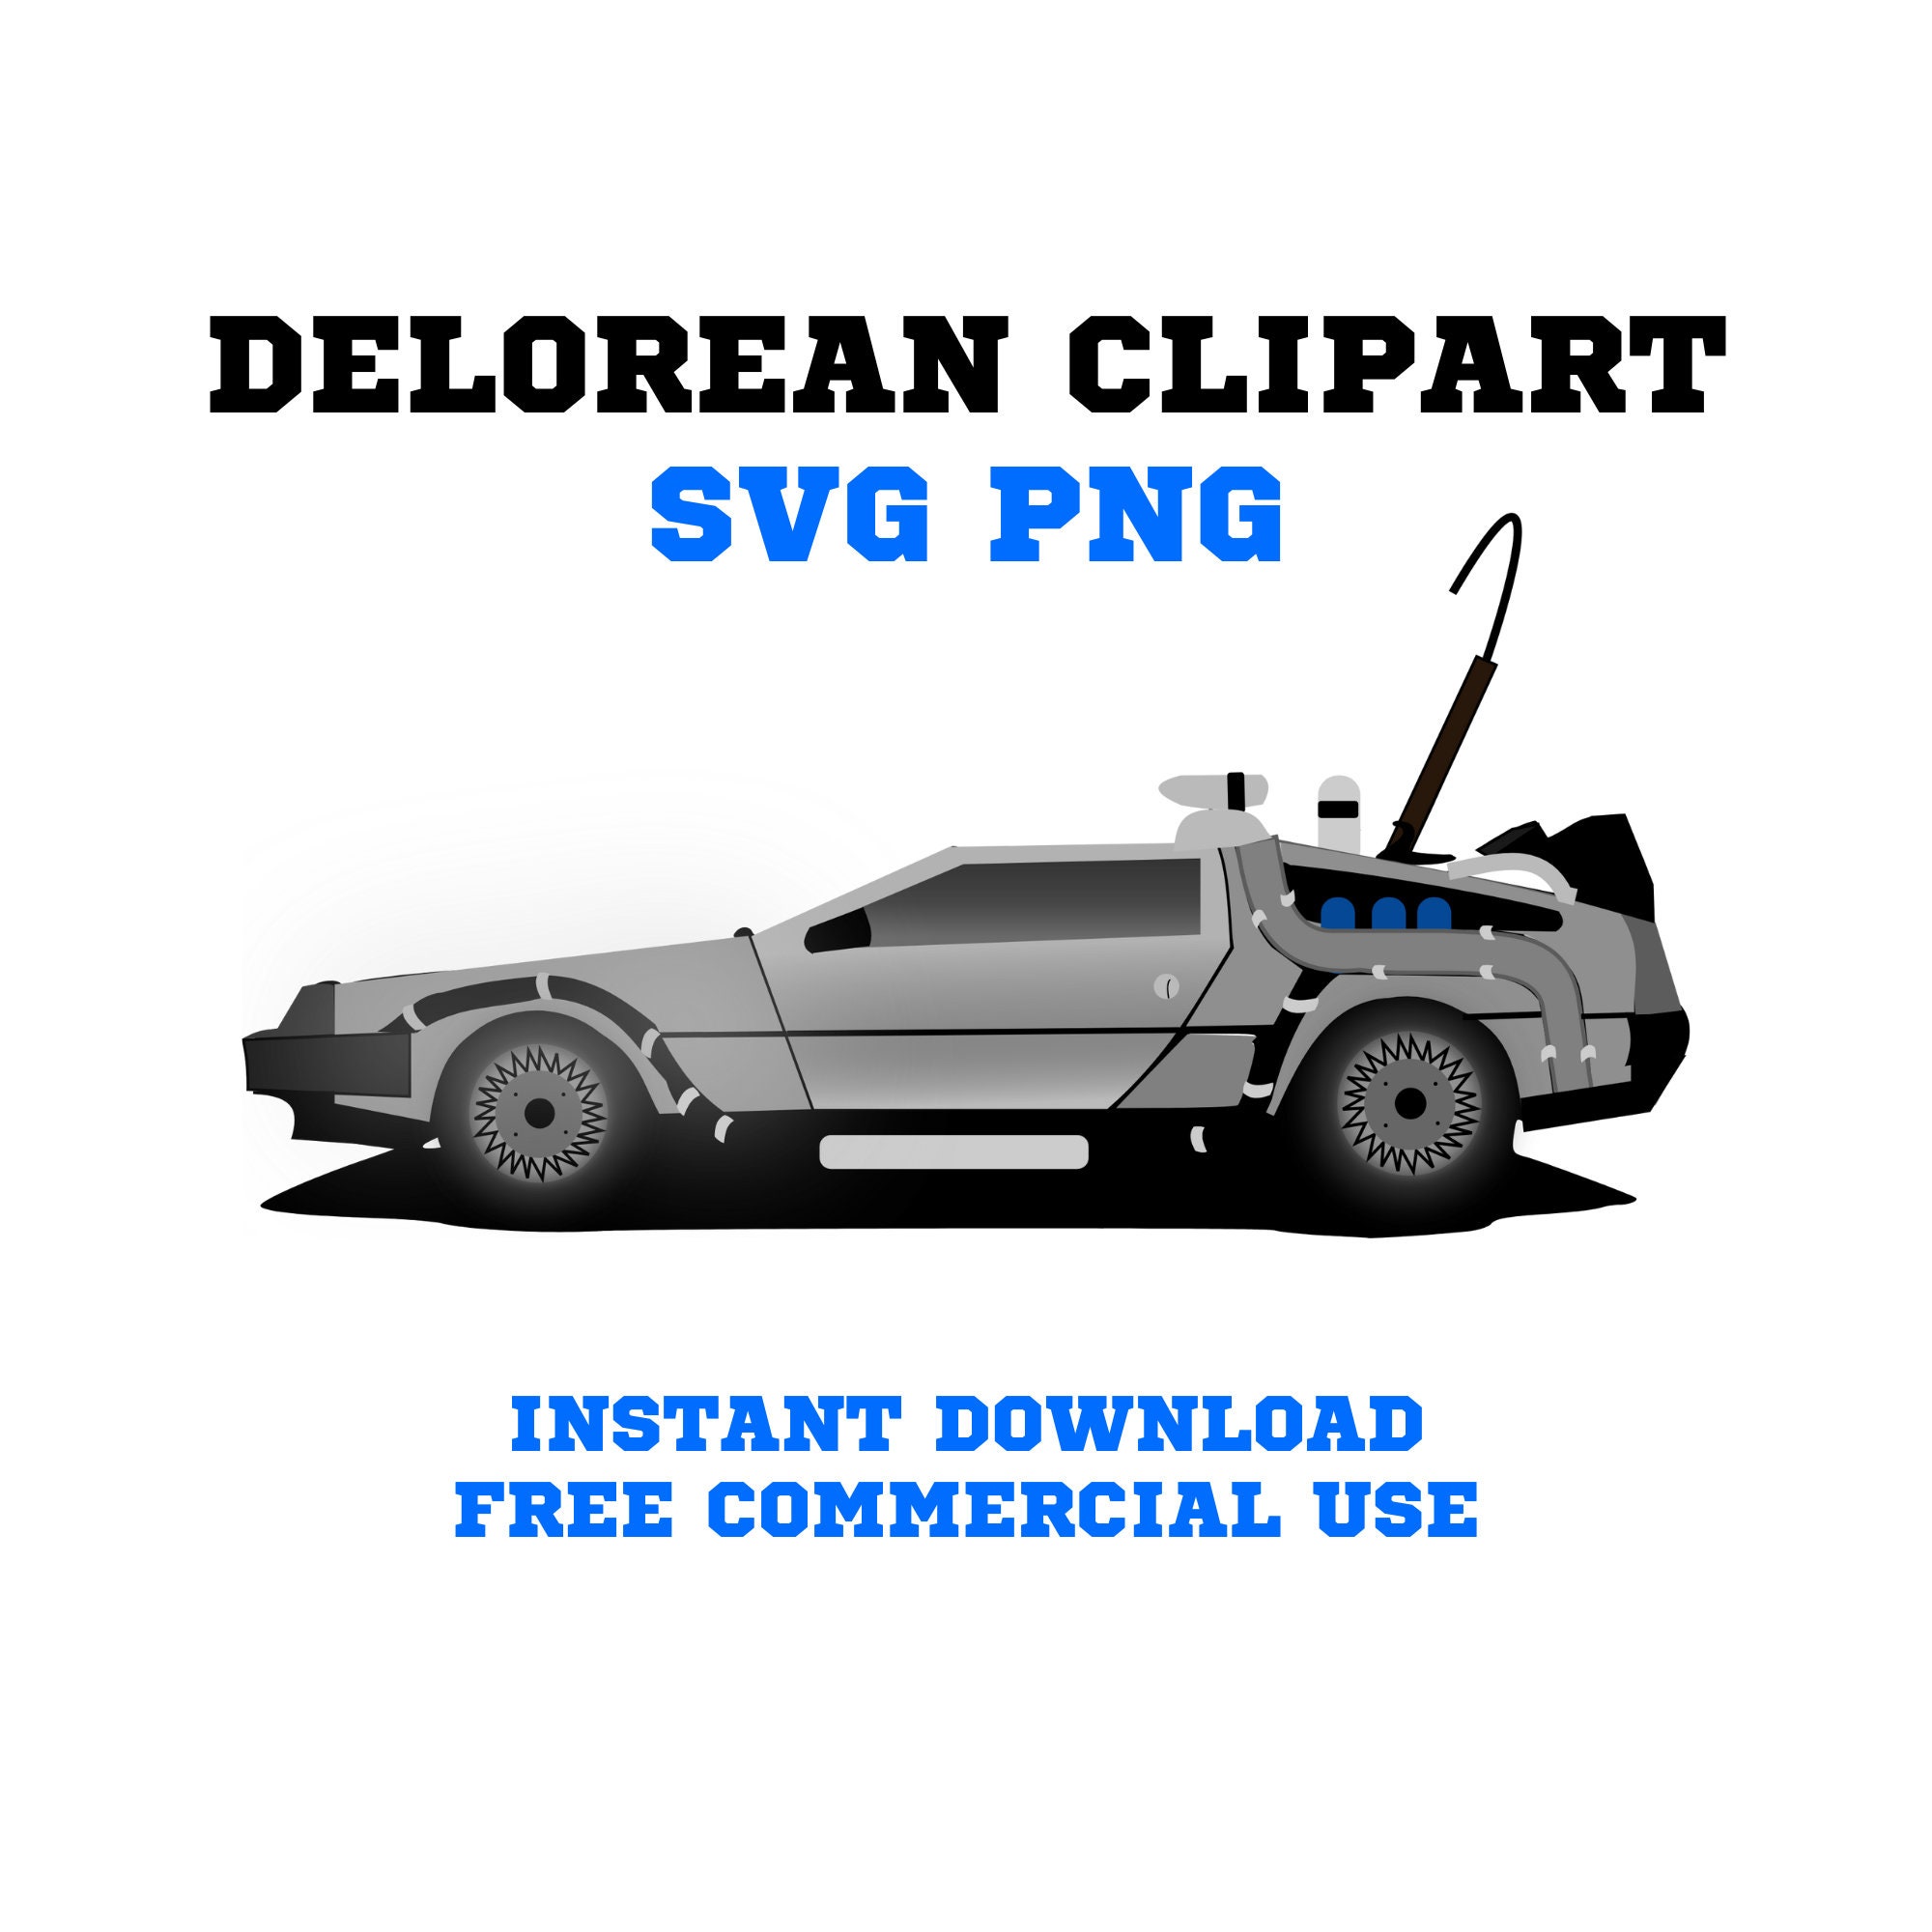 back to the future clipart